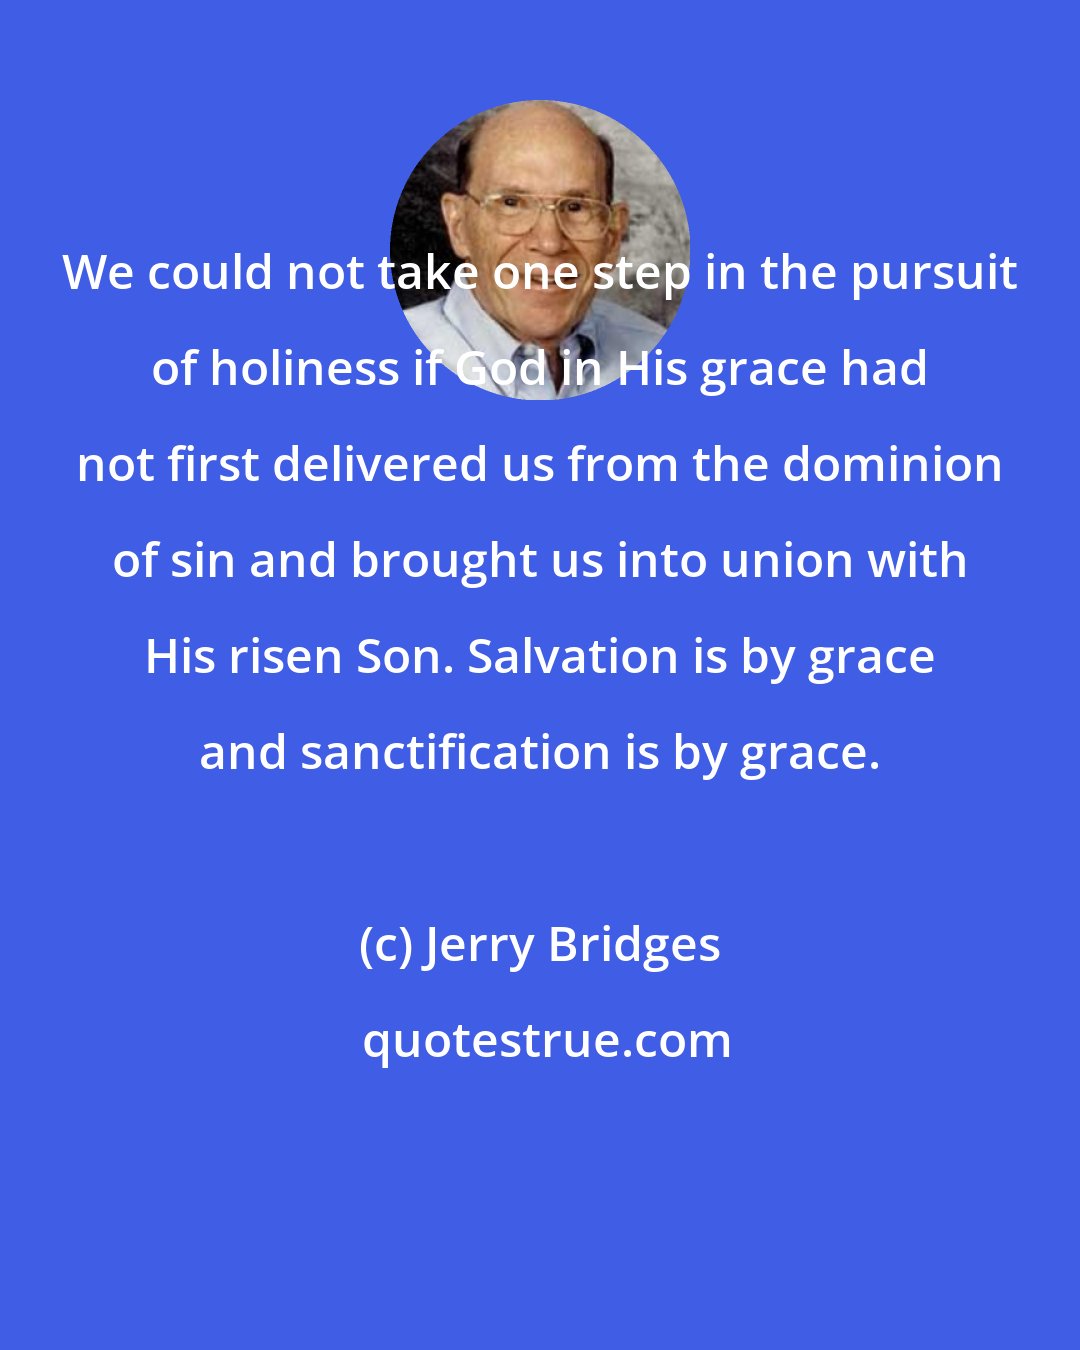 Jerry Bridges: We could not take one step in the pursuit of holiness if God in His grace had not first delivered us from the dominion of sin and brought us into union with His risen Son. Salvation is by grace and sanctification is by grace.